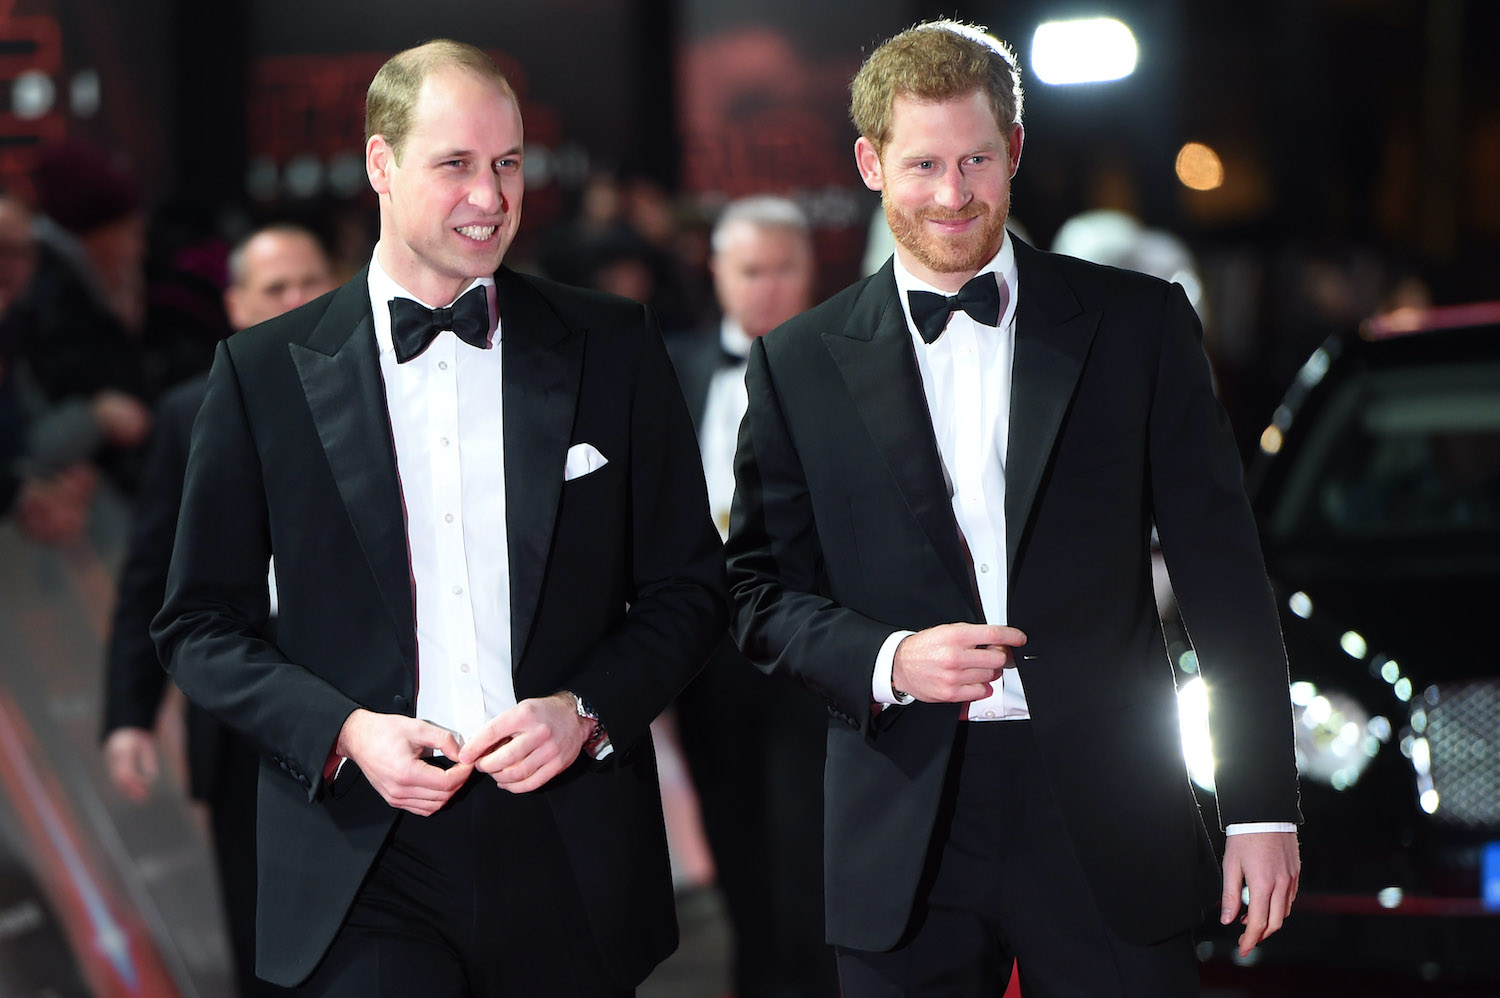 Prince William and Prince Harry attend the European Premiere of 'Star Wars: The Last Jedi' at Royal Albert Hall on December 12, 2017